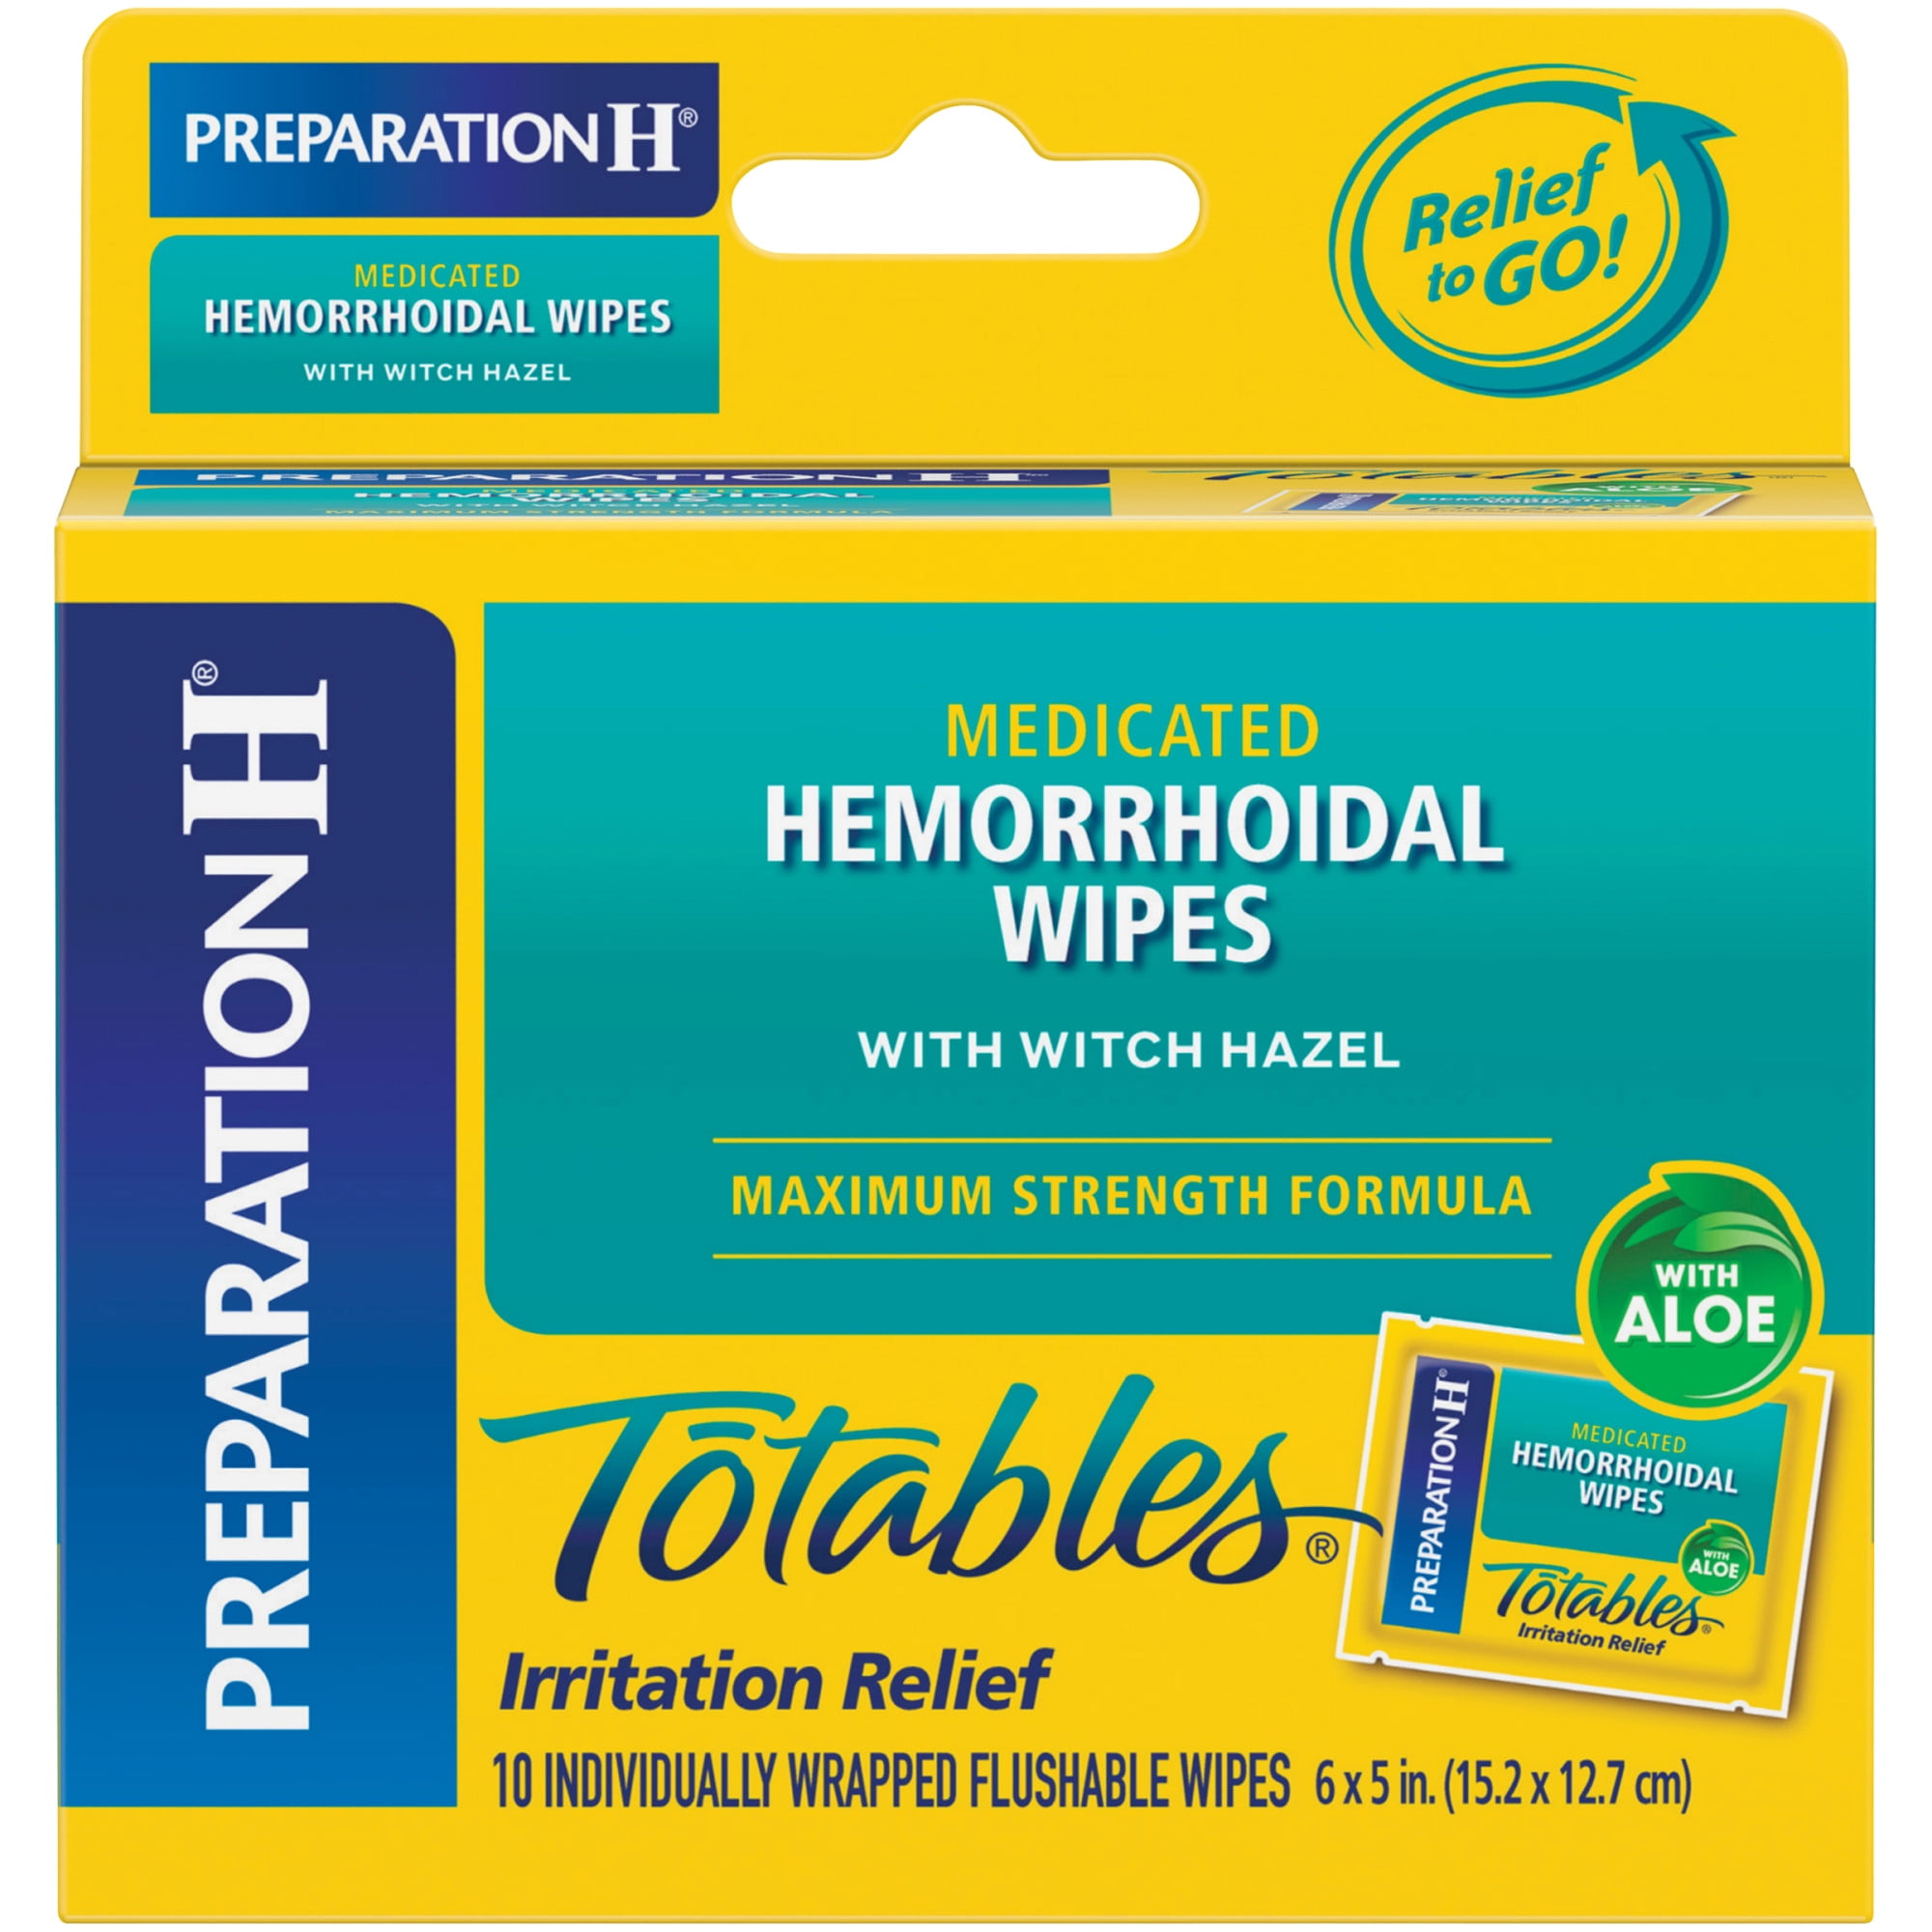 Preparation H Witch Hazel Hemorrhoid Relief Flushable Medicated Wipes, 10 Count